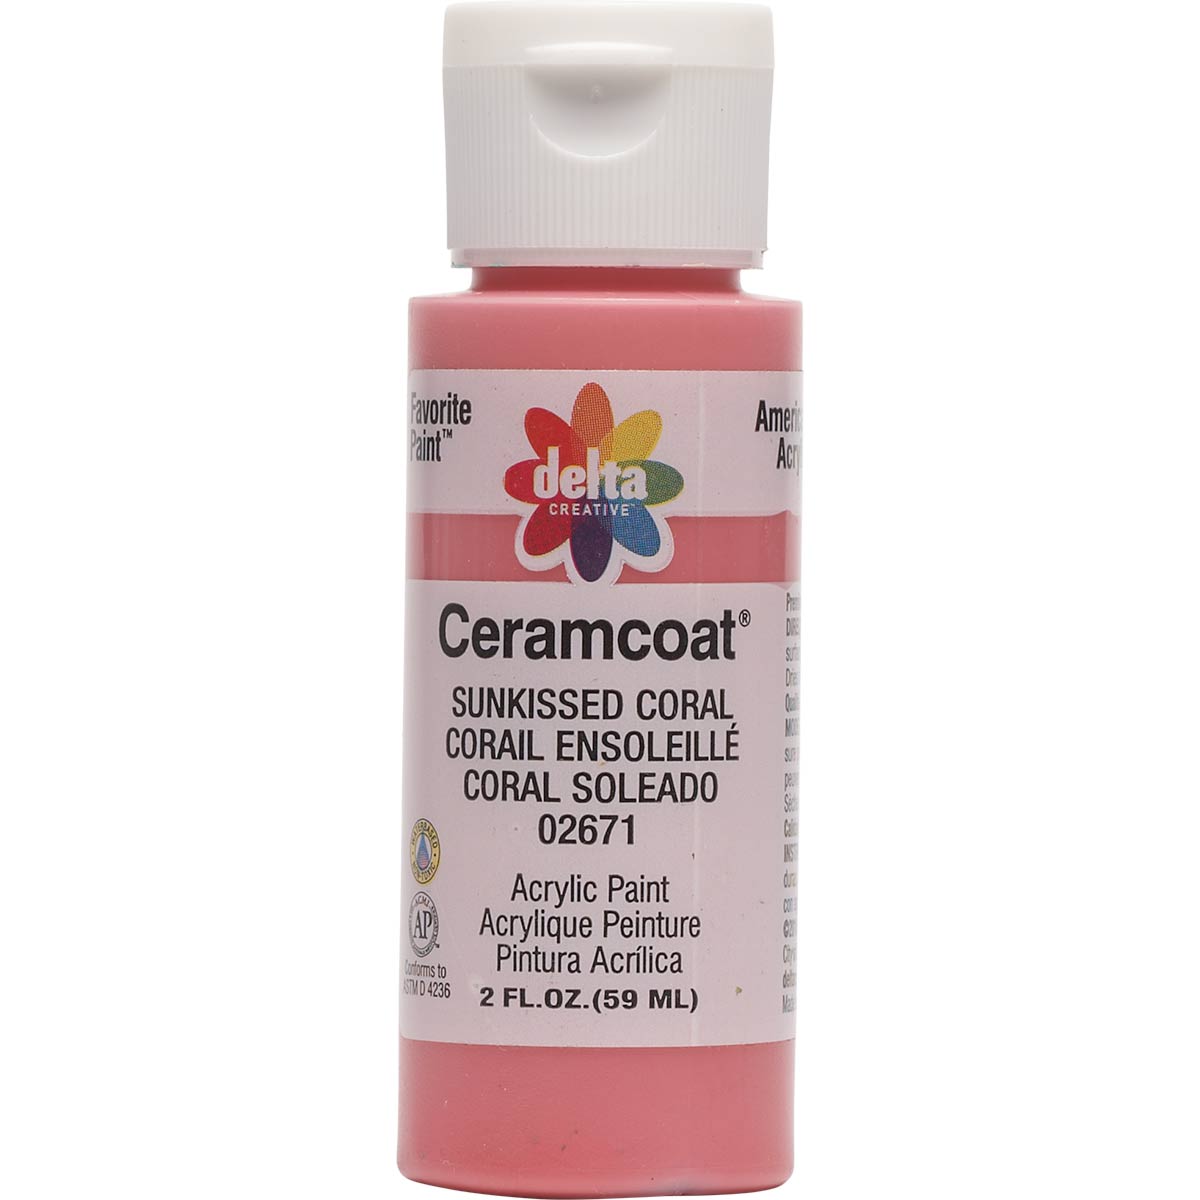 Delta Ceramcoat Acrylic Paint - Sunkissed Coral, 2 oz. - 026710202W